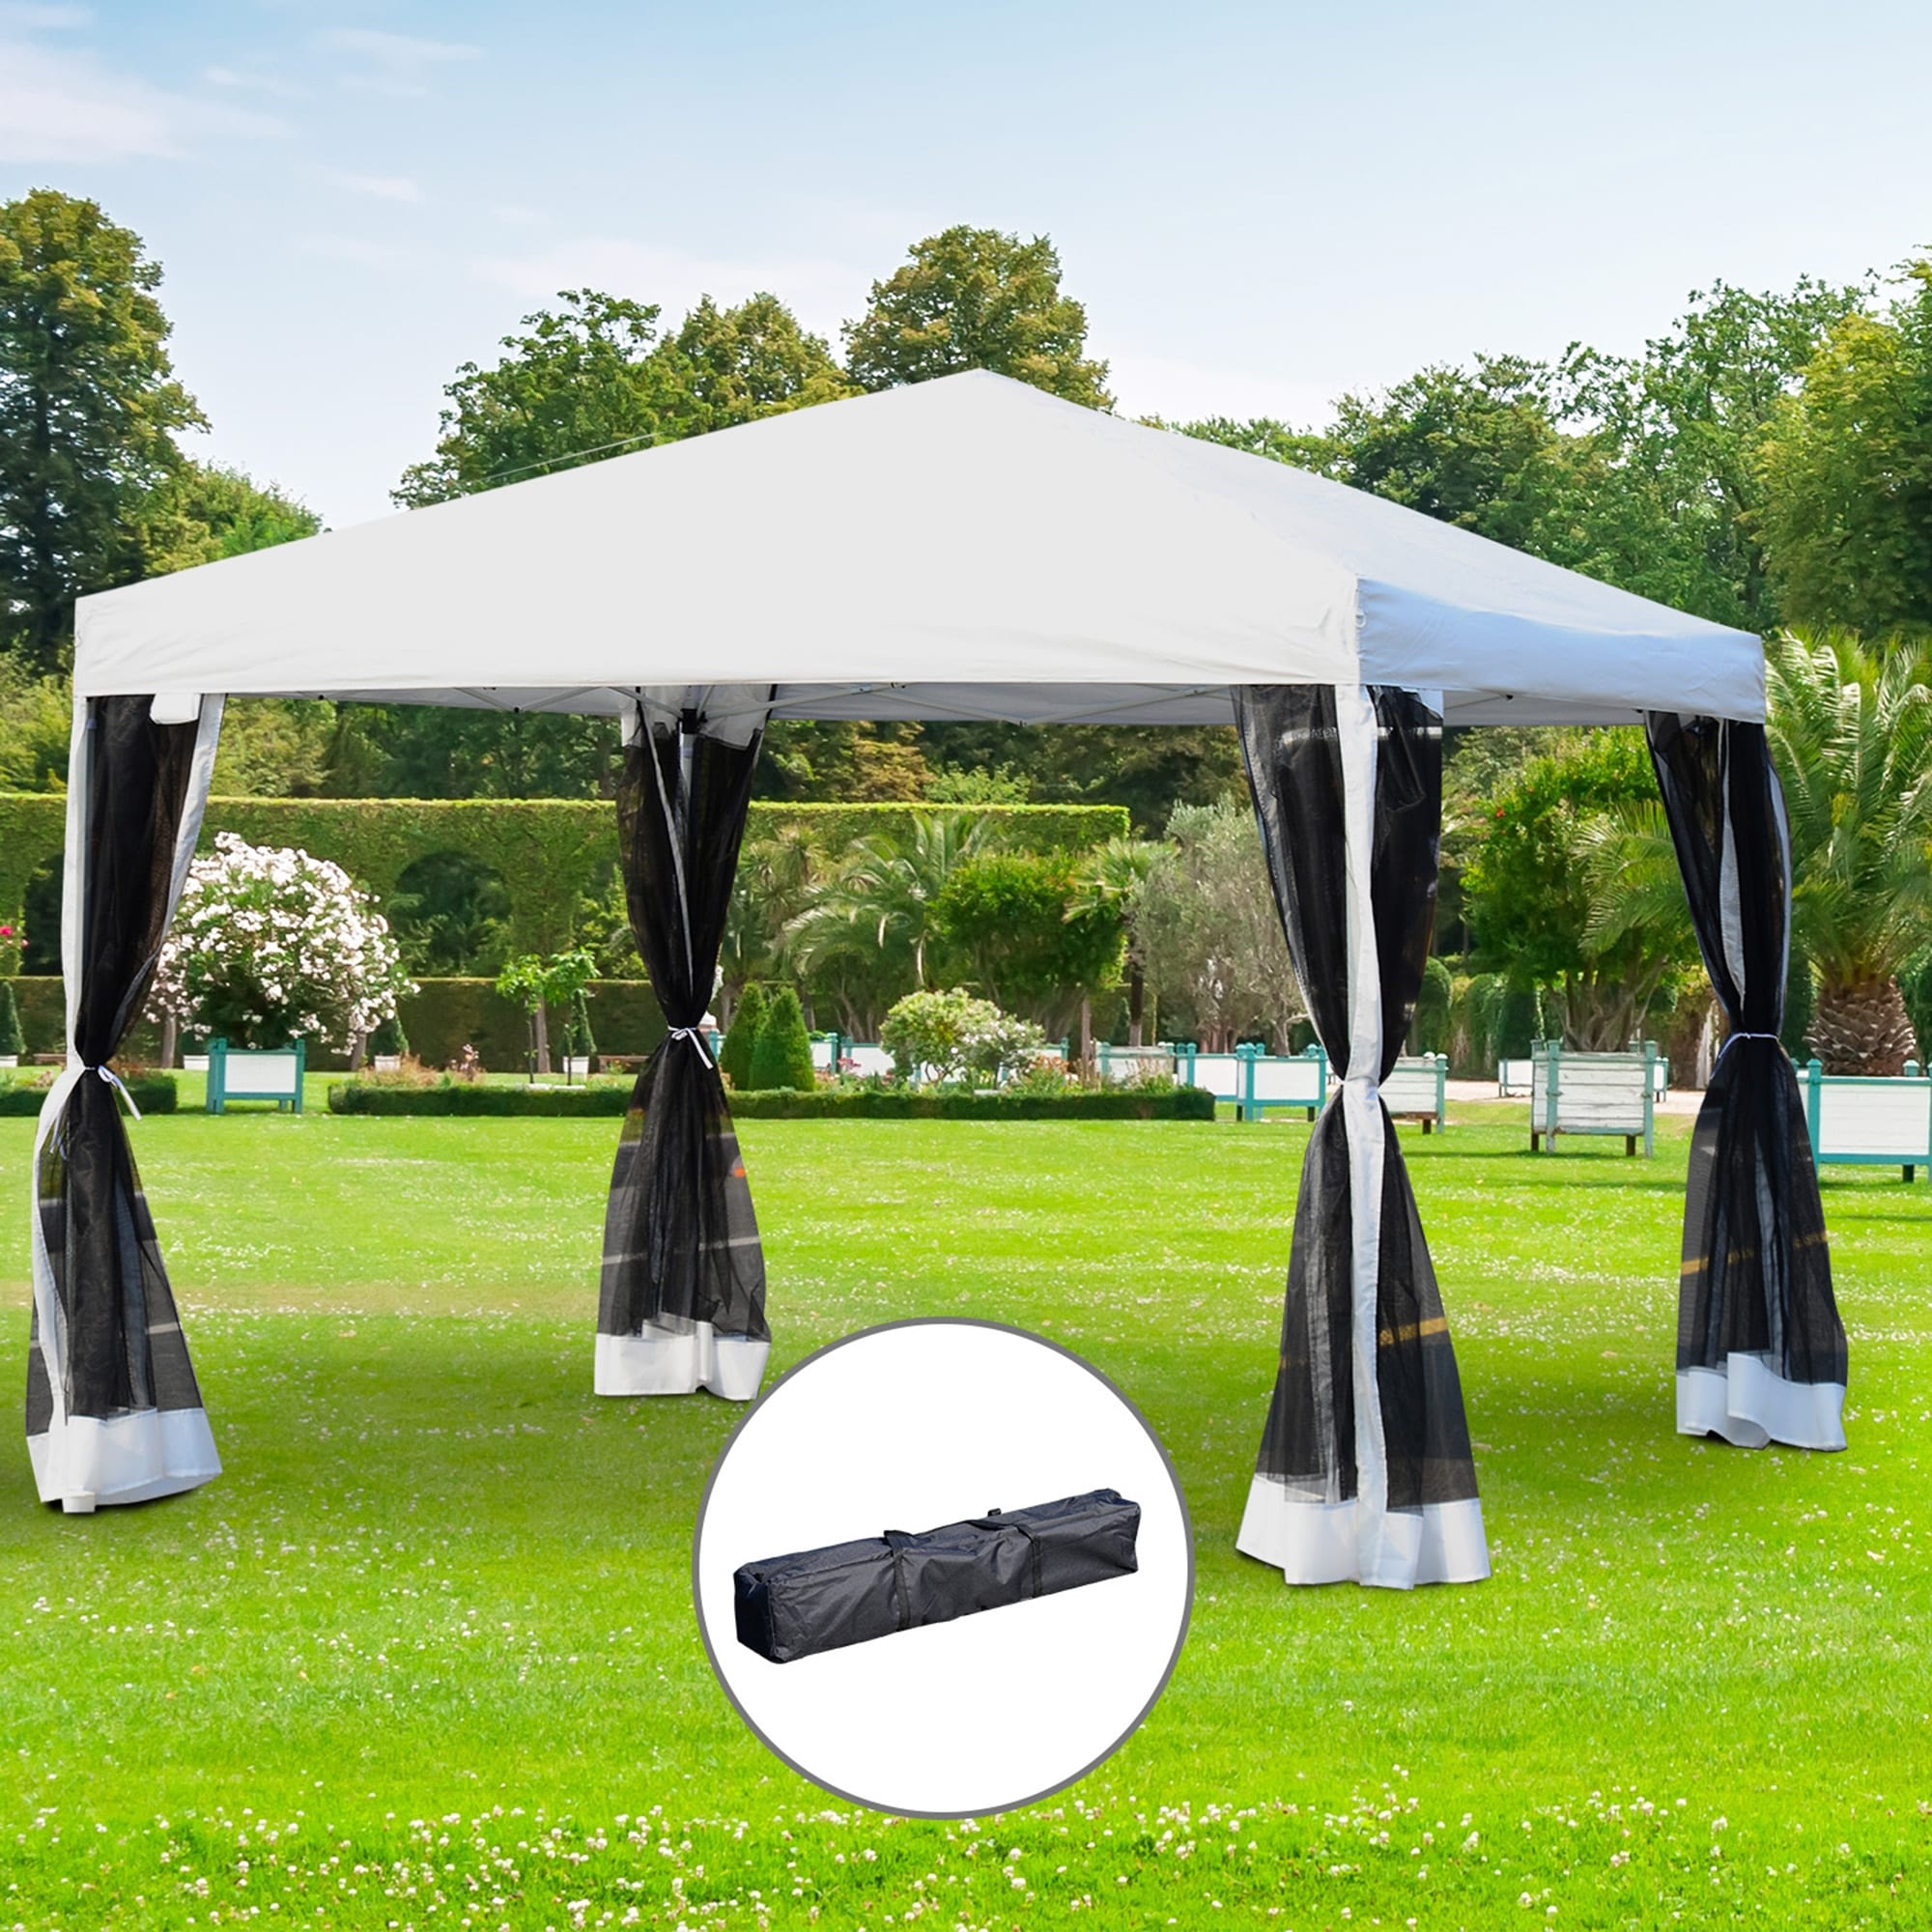 Outsunny 12' x 12' Pop Up Canopy, Foldable Canopy Tent with